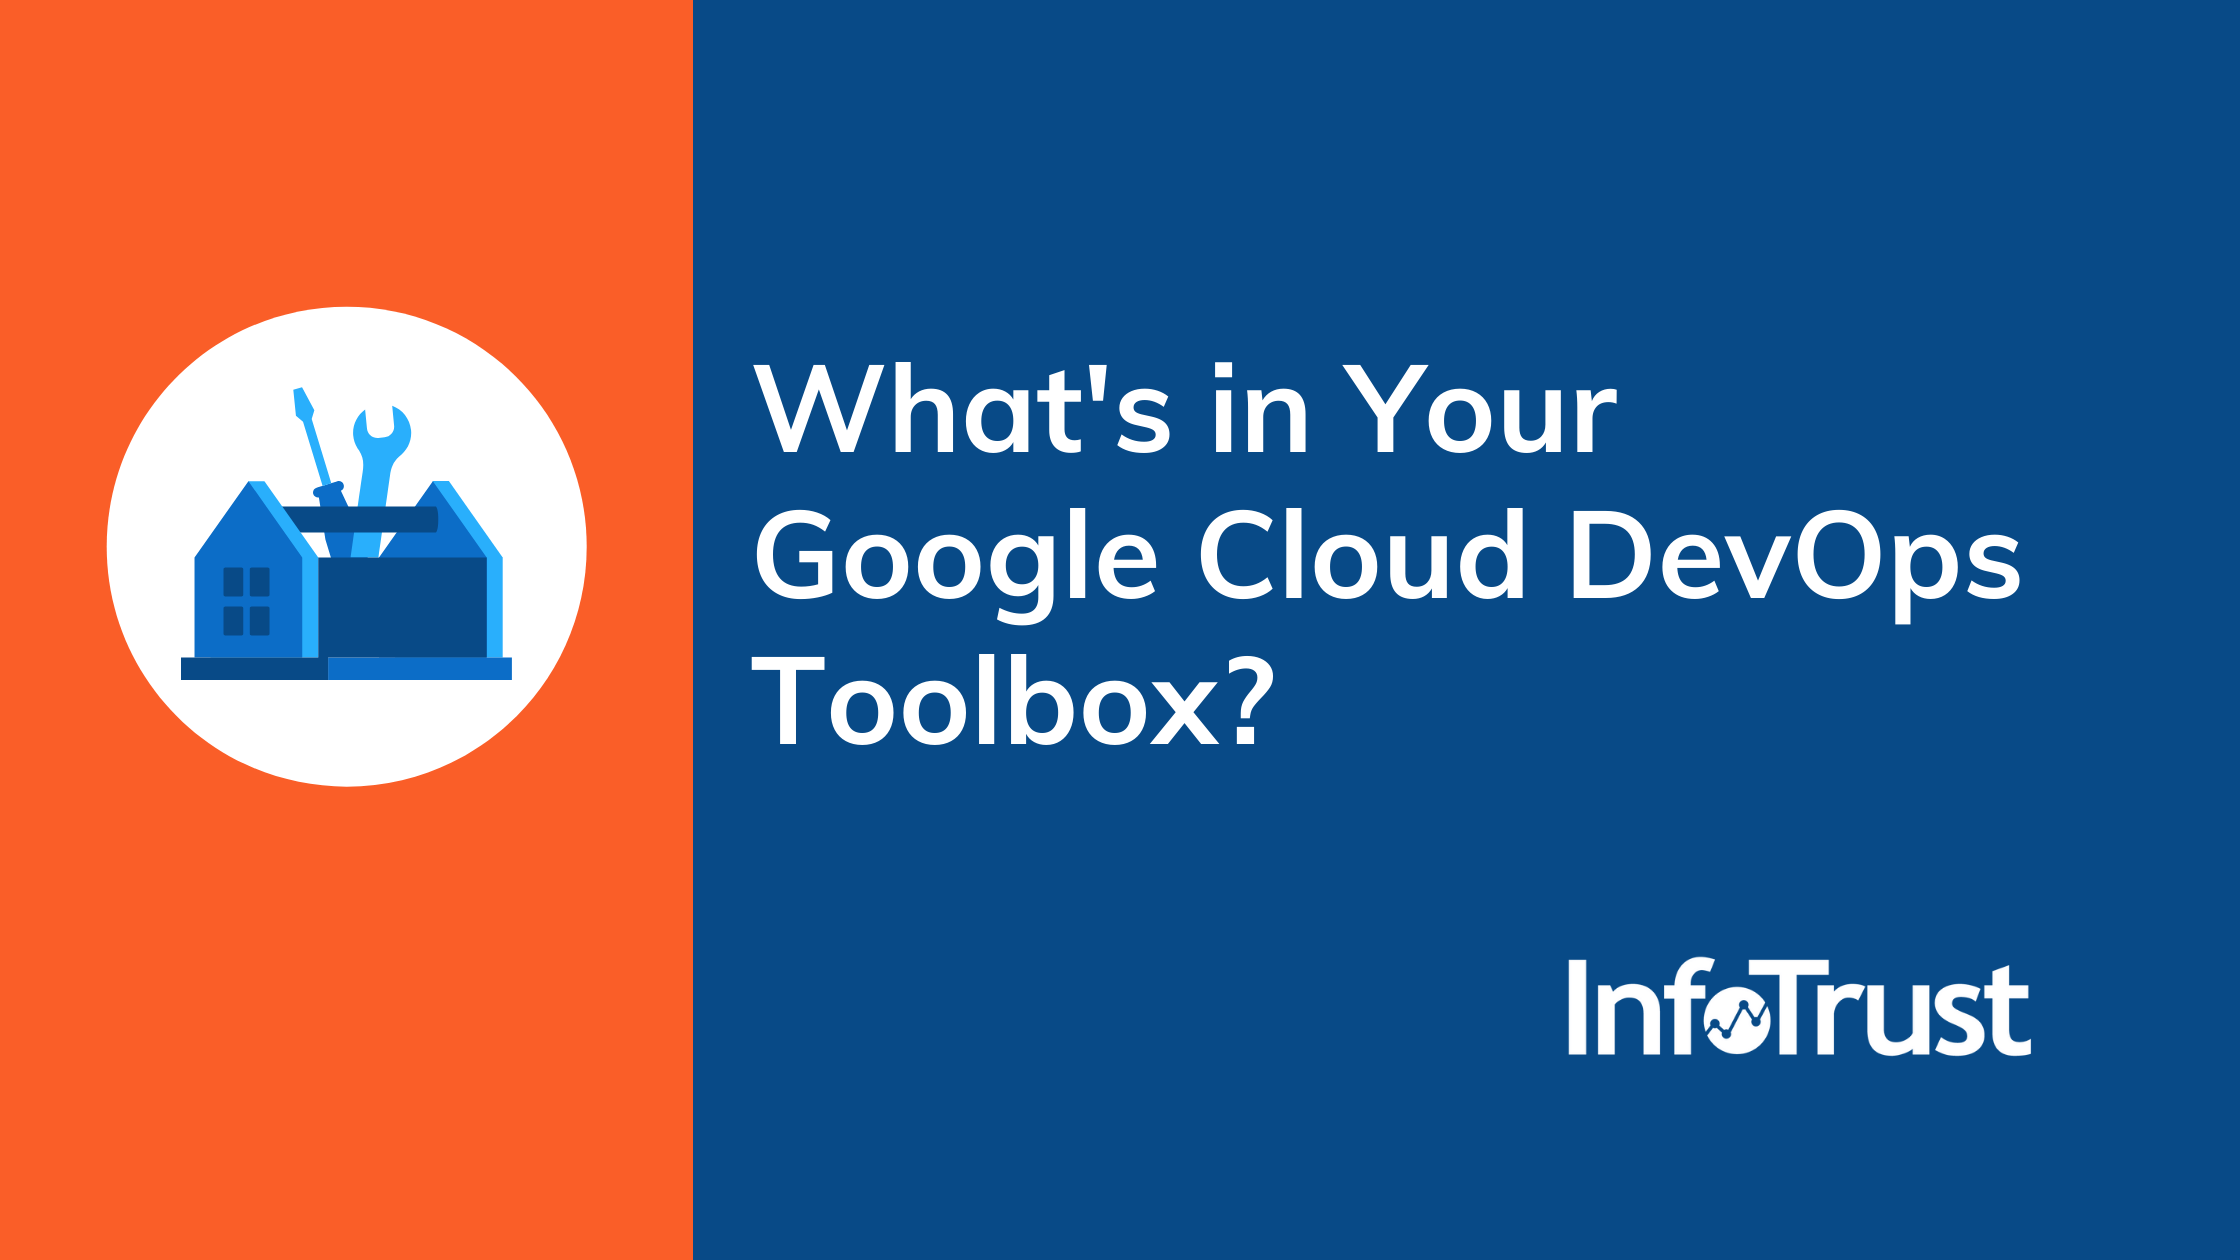 What’s in Your Google Cloud DevOps Toolbox?